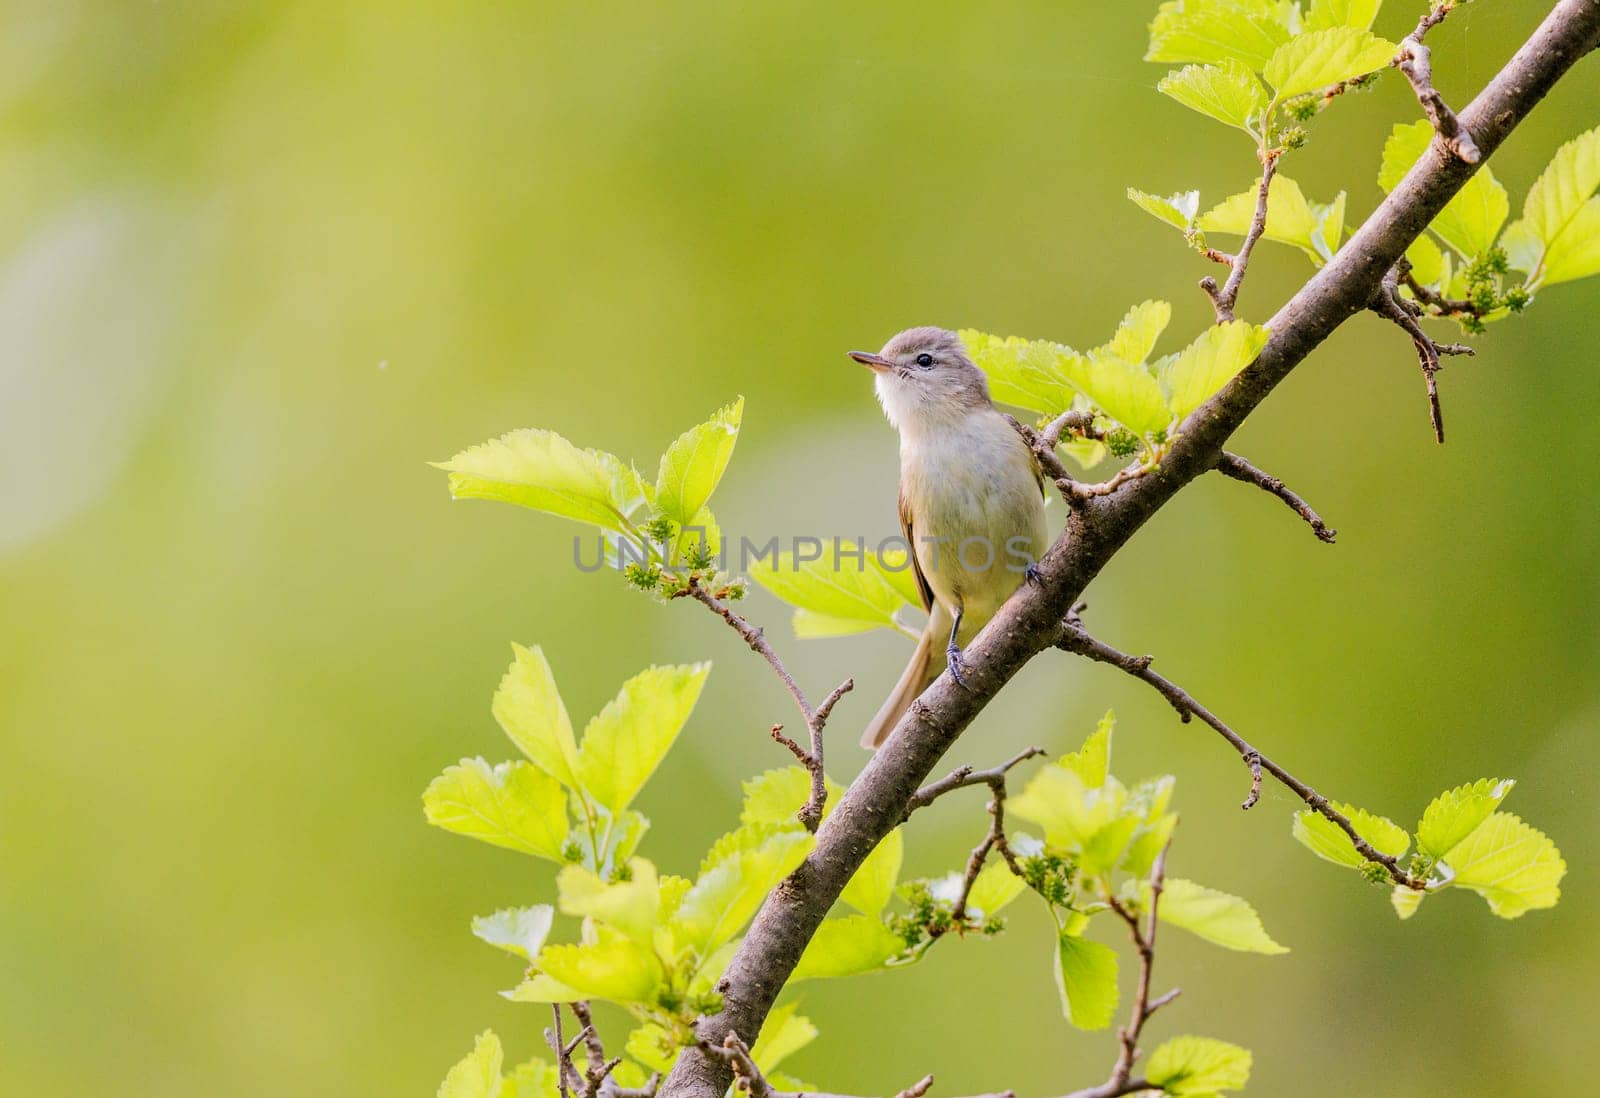 Warbling Vireo warbling from the tree tops in Ohio